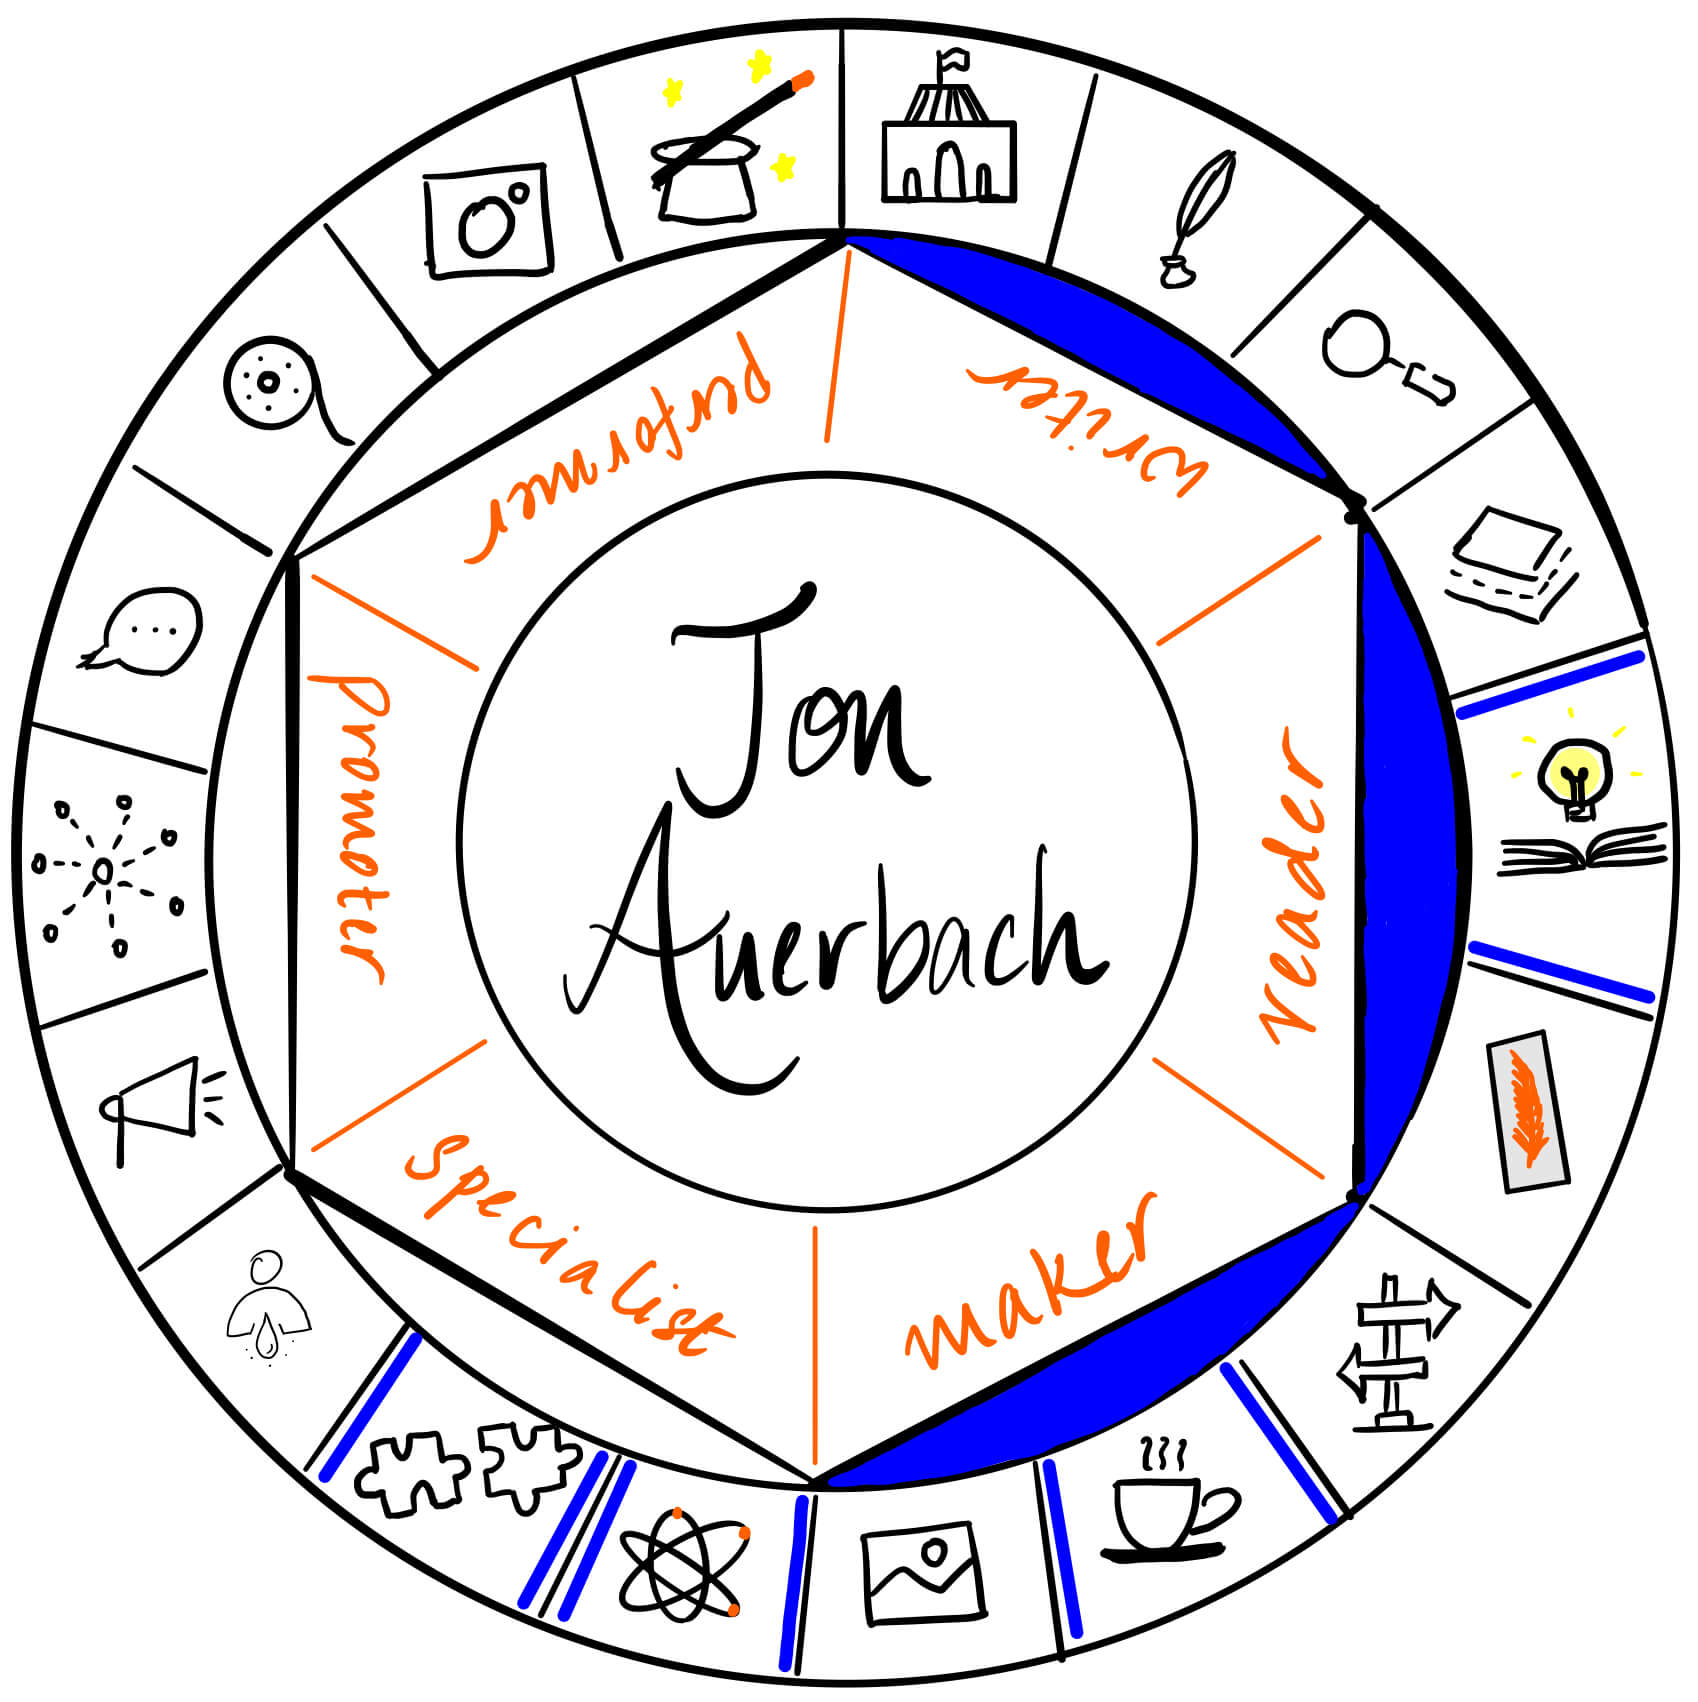 Jon Auerbach is a writer, reader and maker. It's a pleasure to have him over on The Creator's Roulette to talk about setting up a Kickstarter campaign for his book.